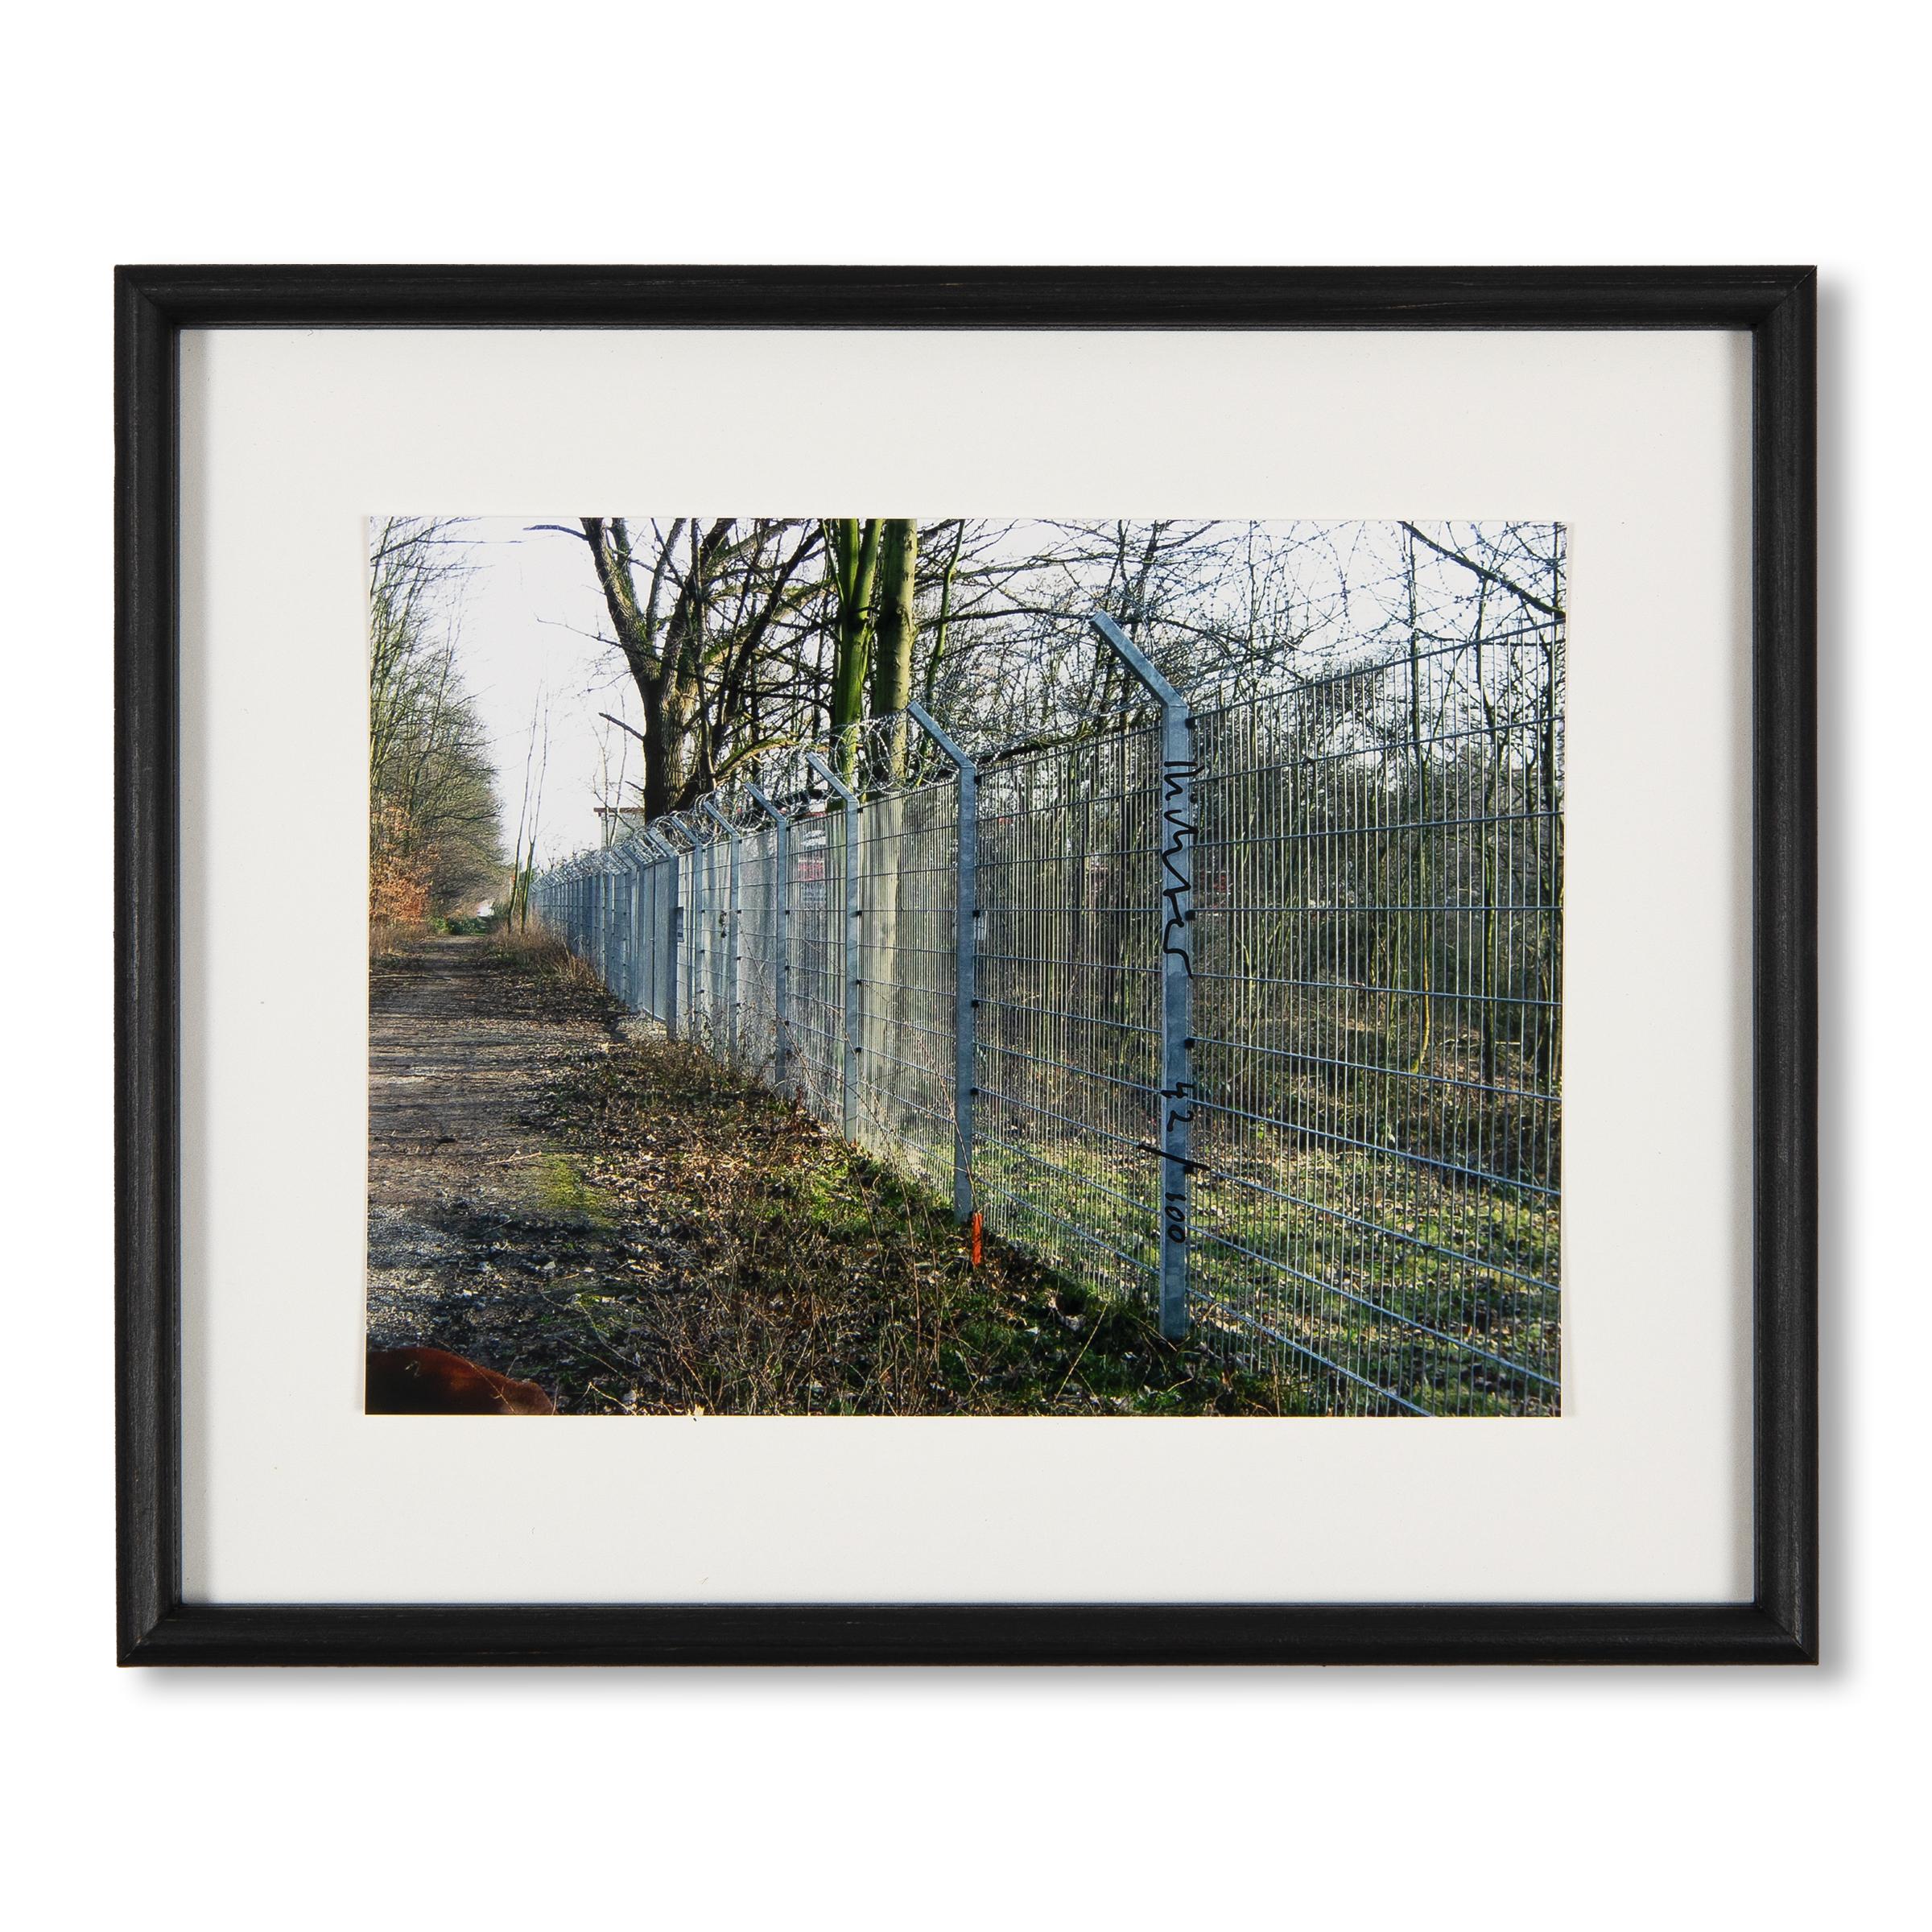 Gerhard Richter (German, b. 1932)
Zaun, 2010
Medium: Colour photograph, mounted on white cardboard, in artist’s frame
Print dimensions: 15 x 20 cm
Frame dimensions: 23.5 x 28.5 cm
Edition of 100: Hand-signed and numbered
Publisher: Edition Staeck,